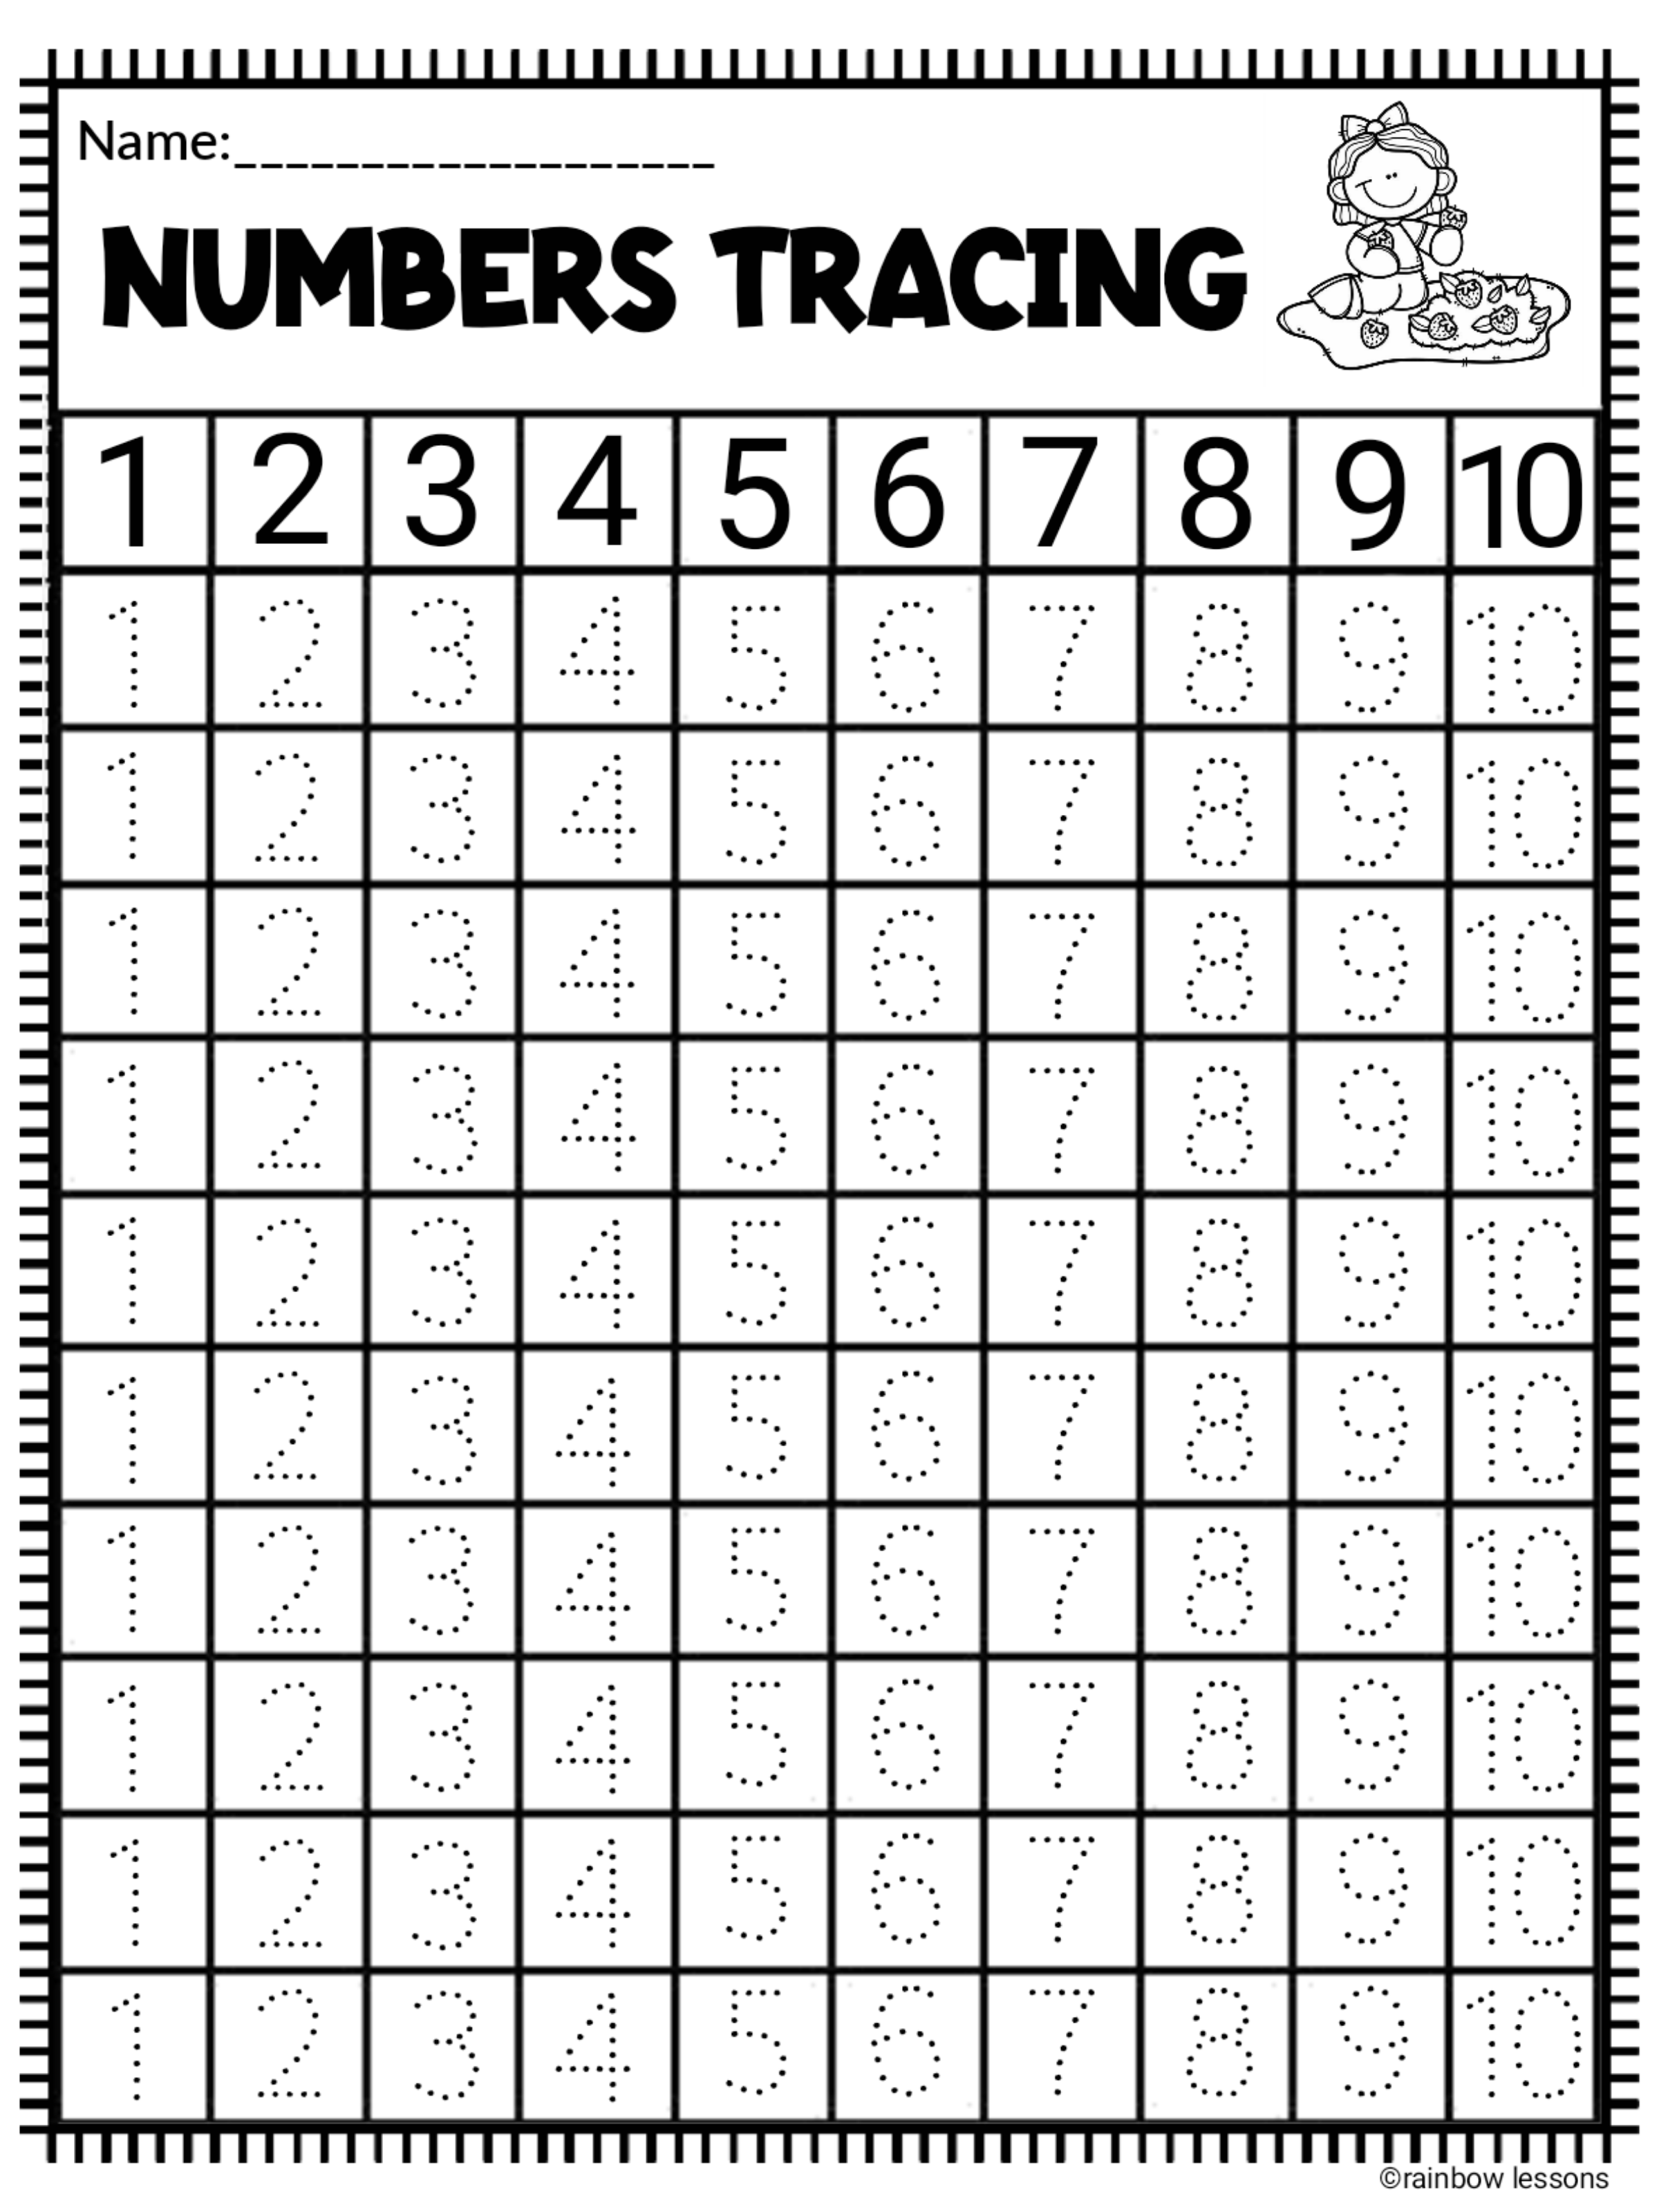 counting-worksheets-1-20-countingworksheets